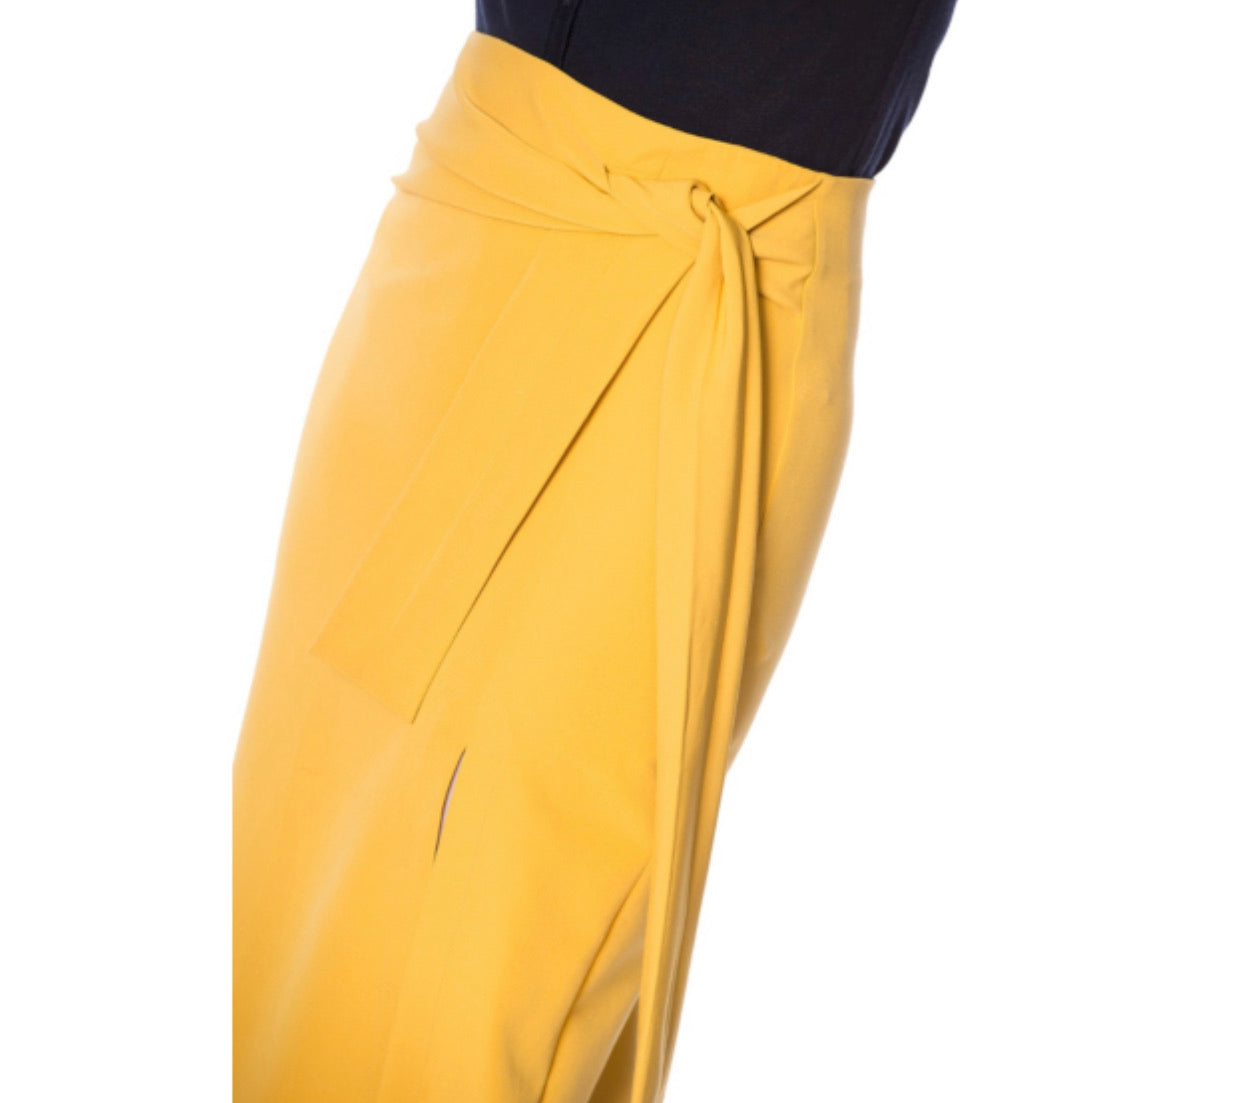 Bow pencil Skirt - Isabel’s Retro & Vintage Clothing